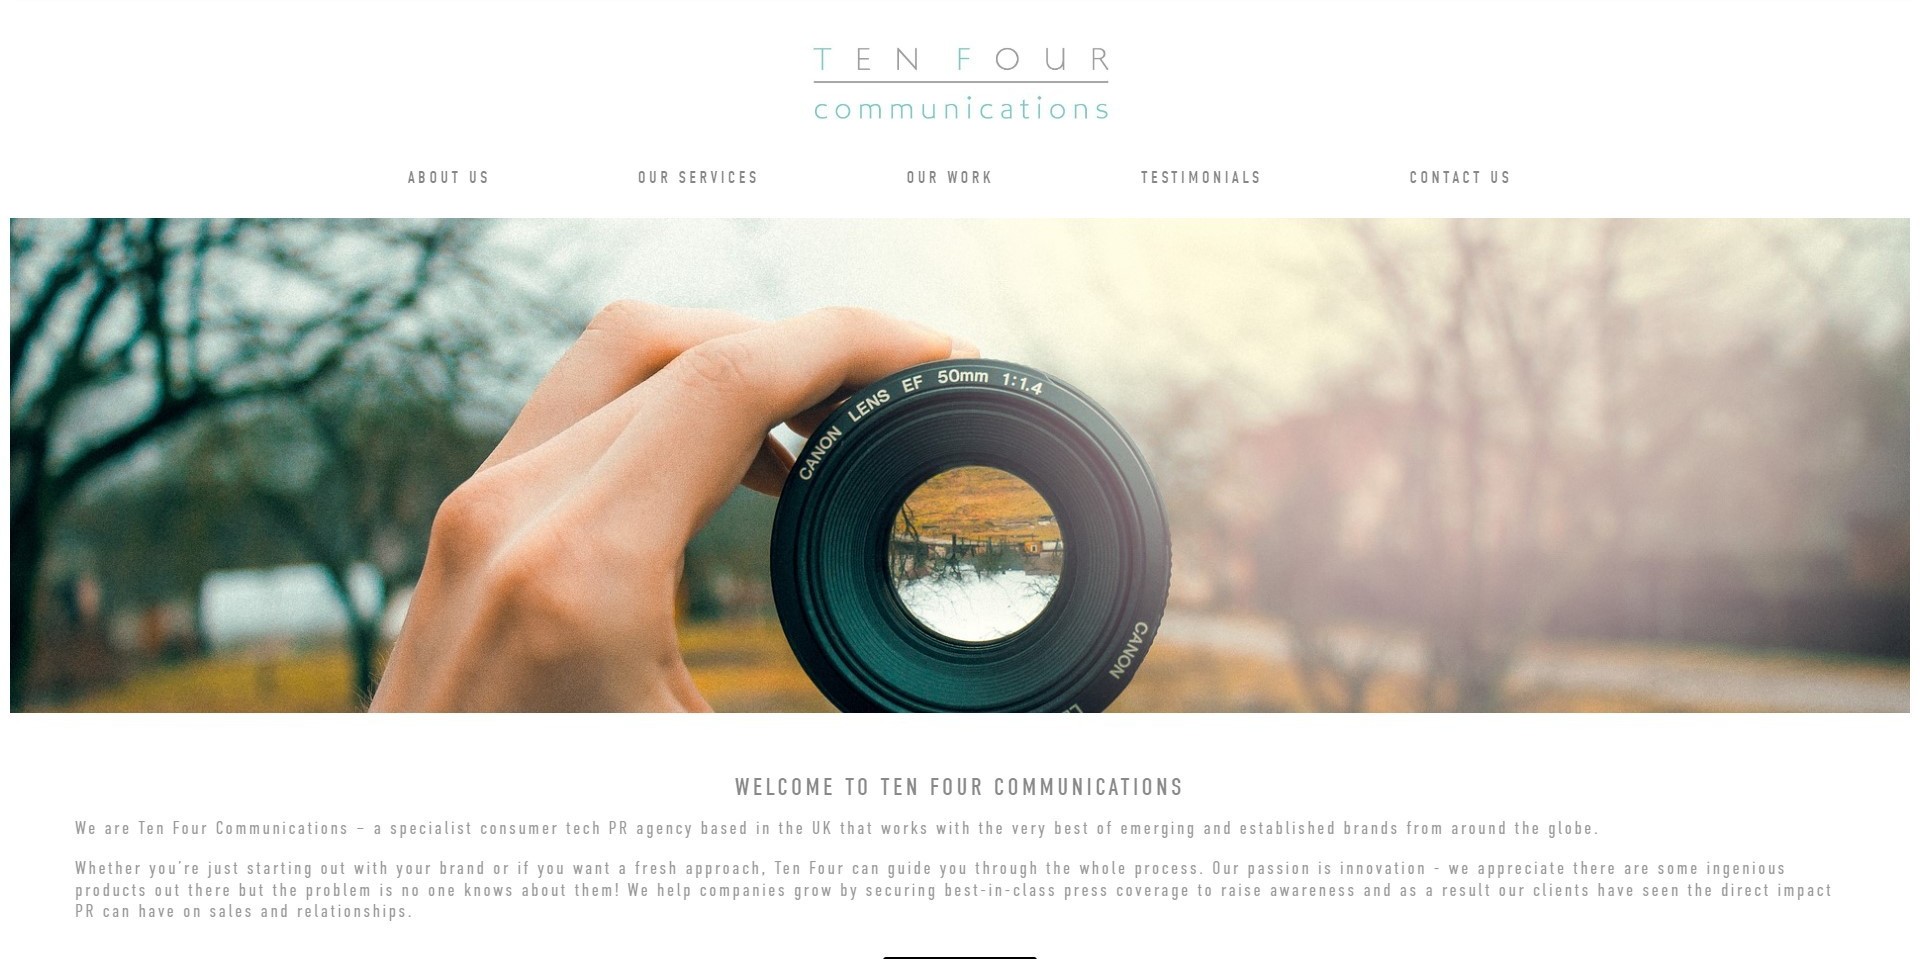 The before Ten Four Communications website, displayed on desktop